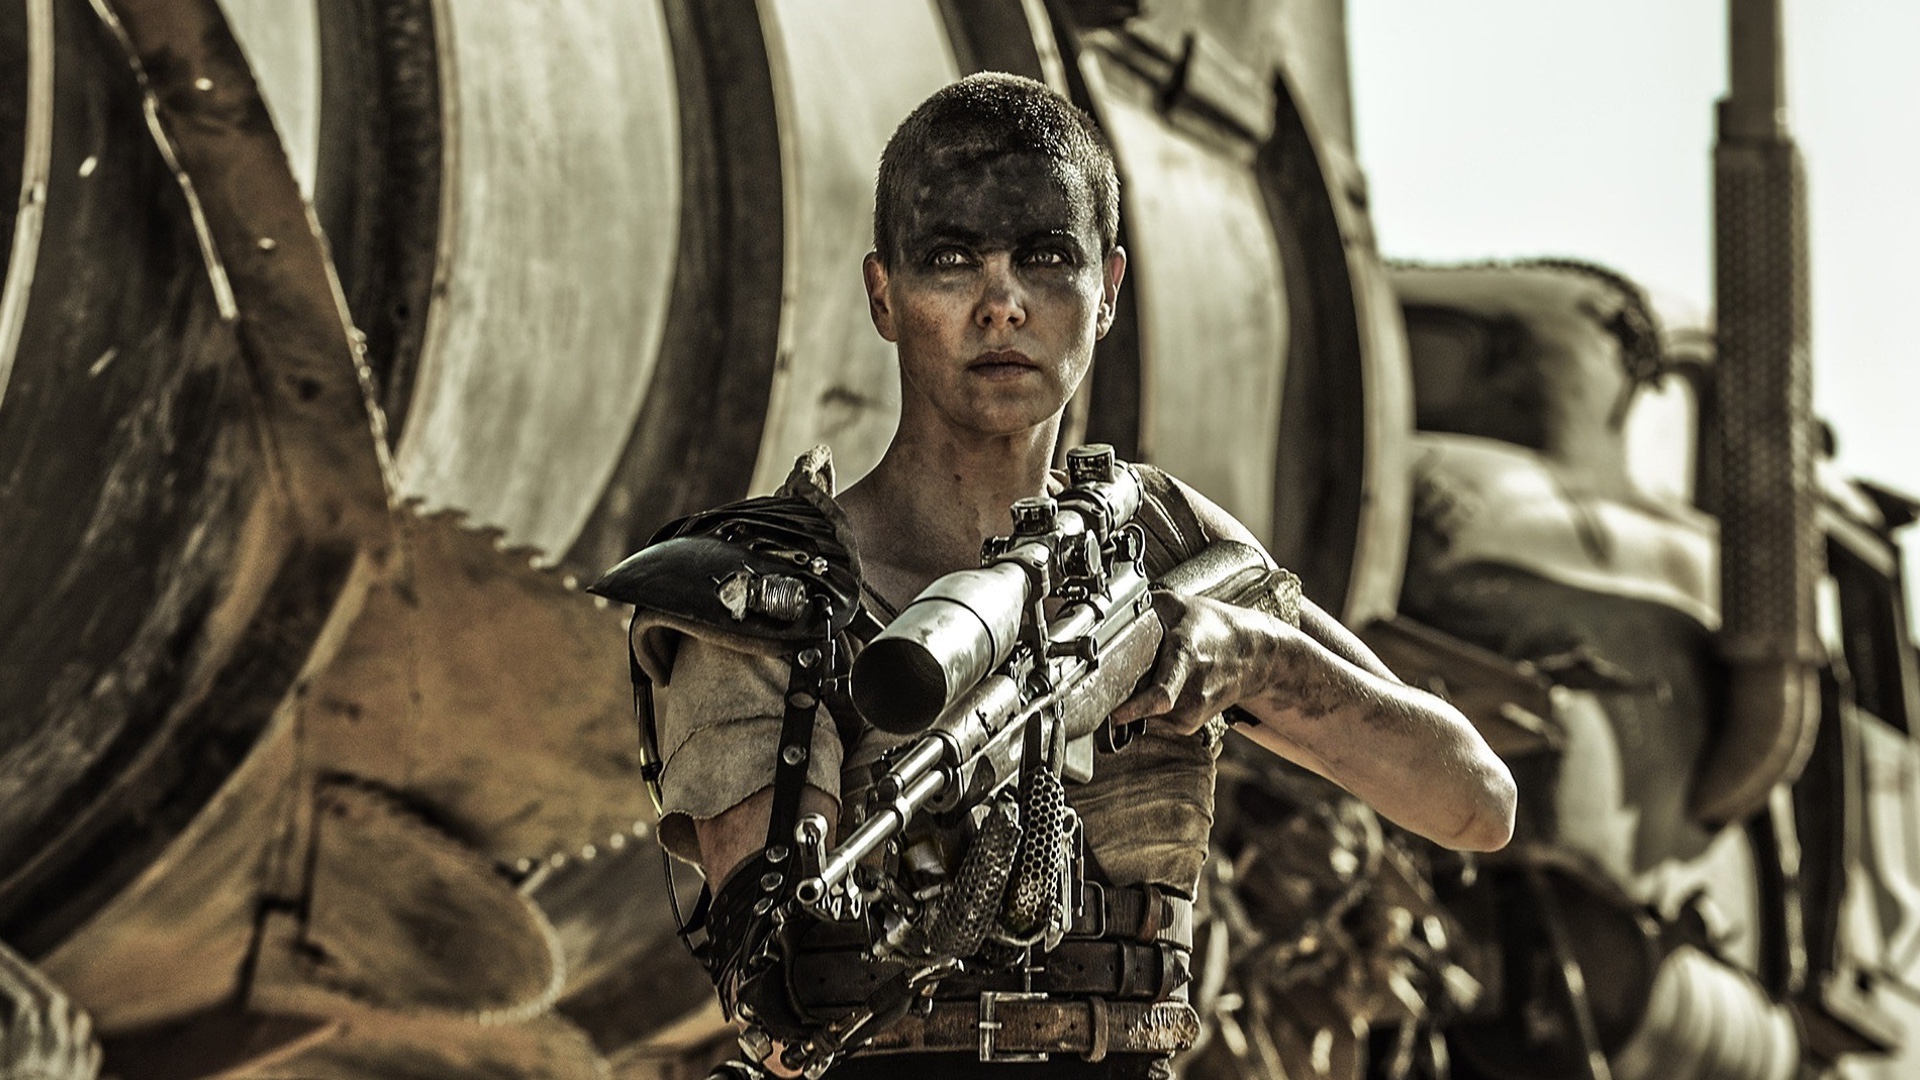 Anya Taylor-Joy Leads Mad Max Spin-Off, Furiosa into Prequel